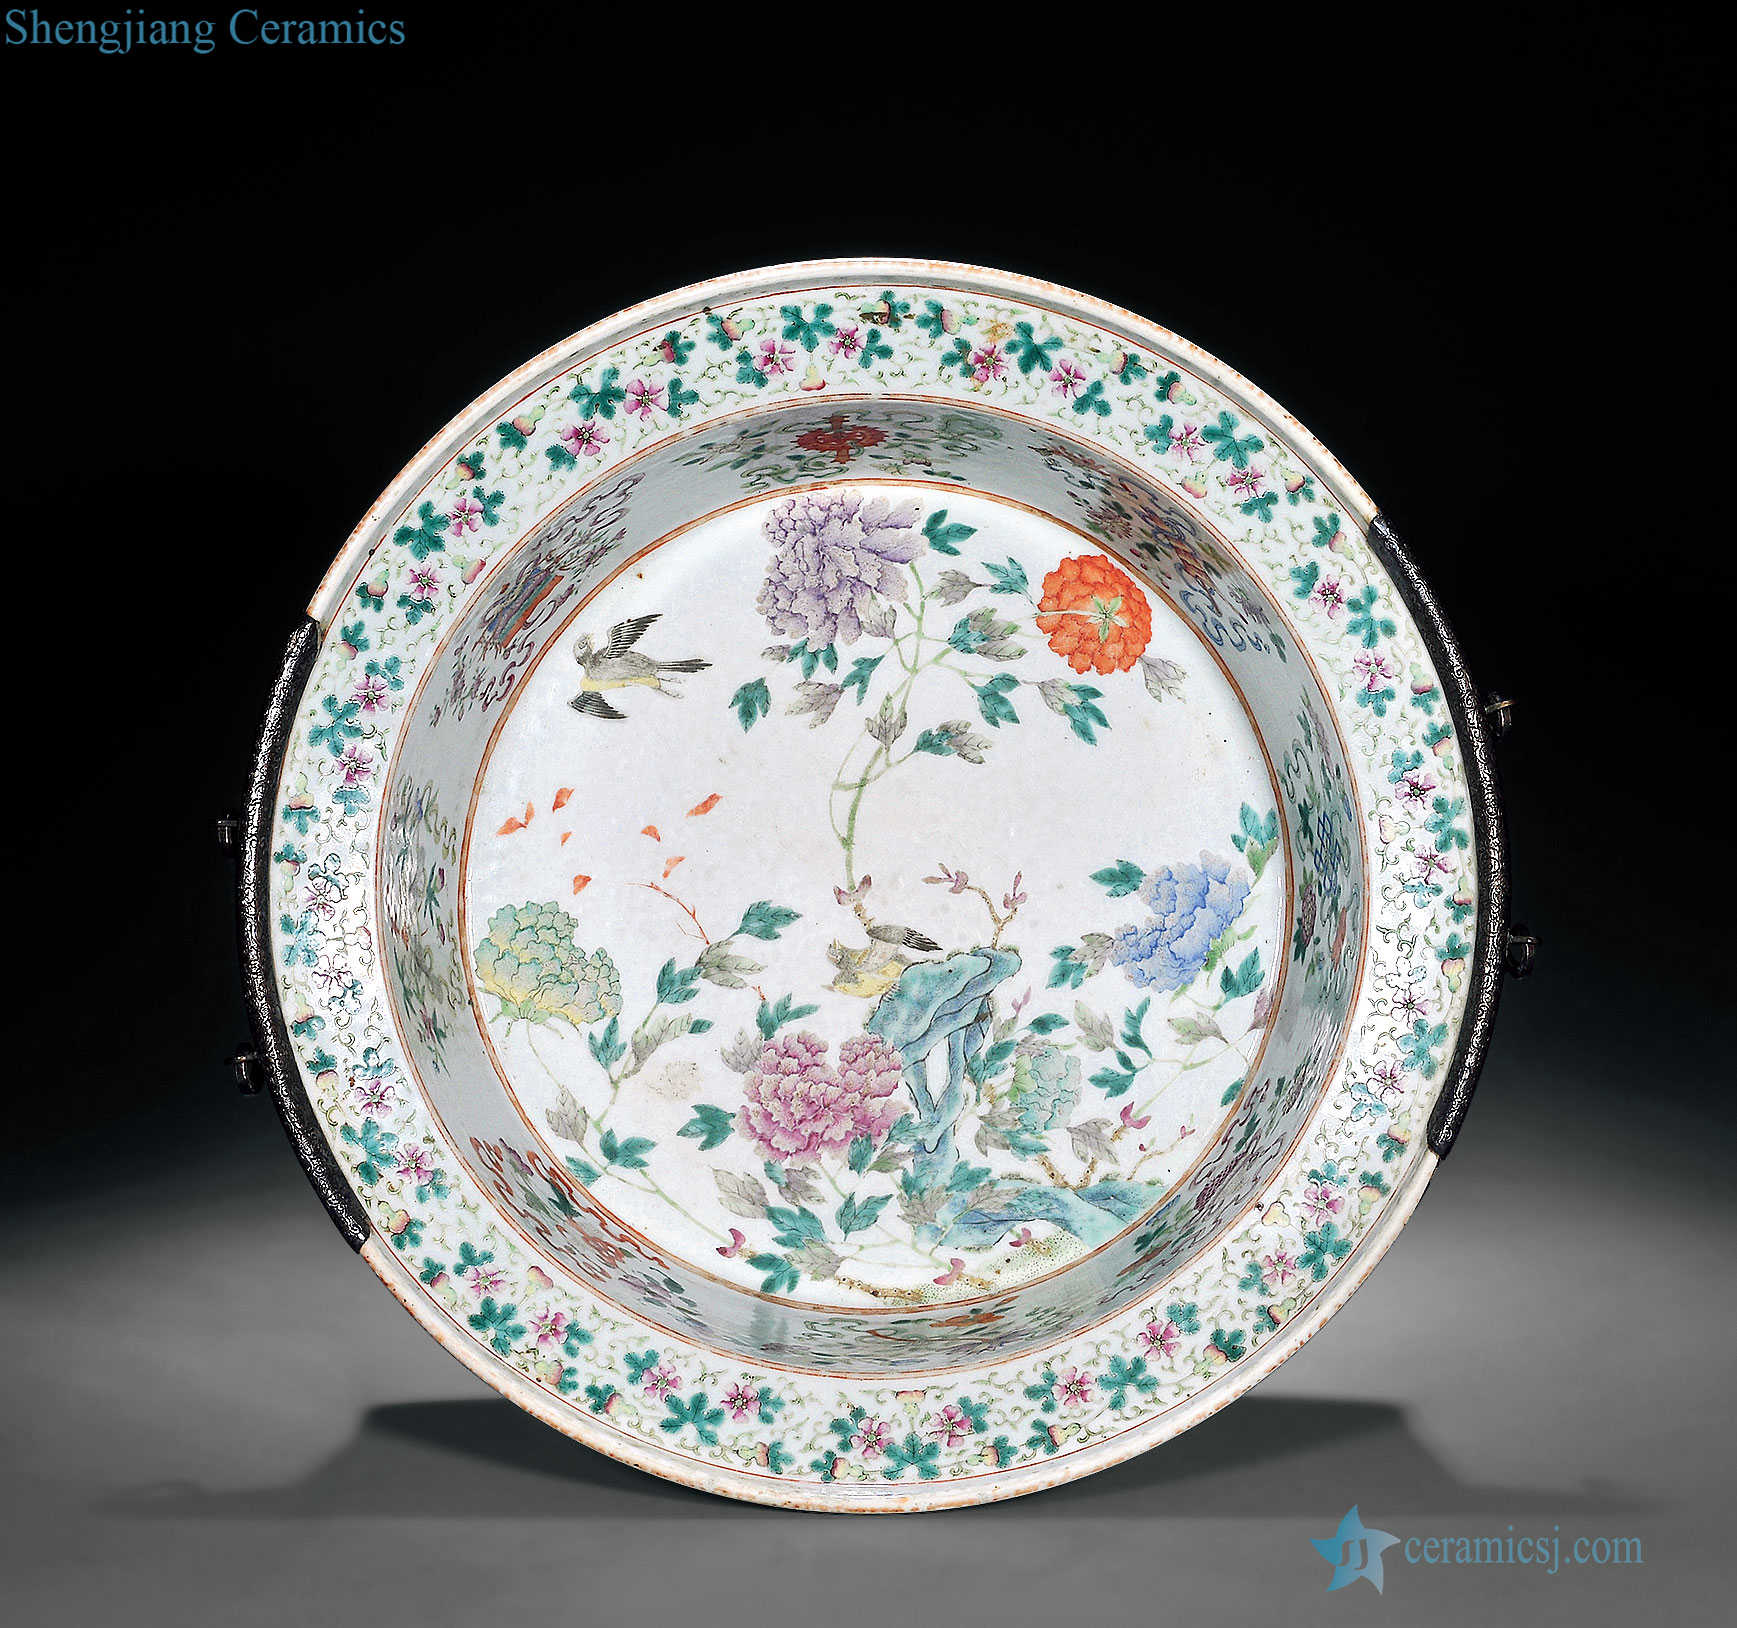 In late qing dynasty Pastel ferro generation sweet flowers and birds and ten thousand grain fold along the basin